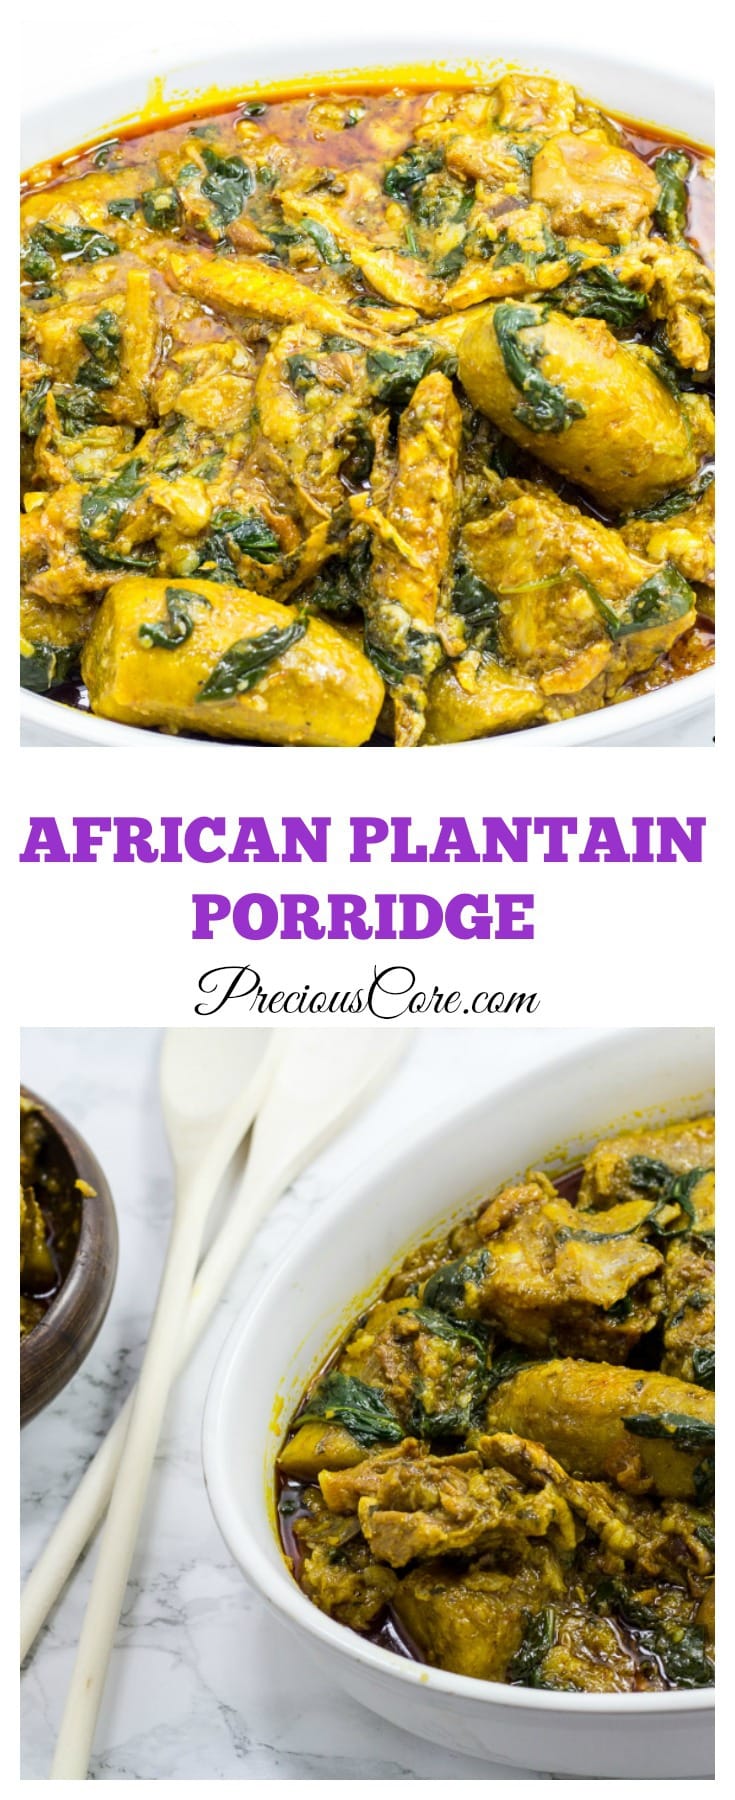 A one-pot African plantain dish - perfect for dinner!